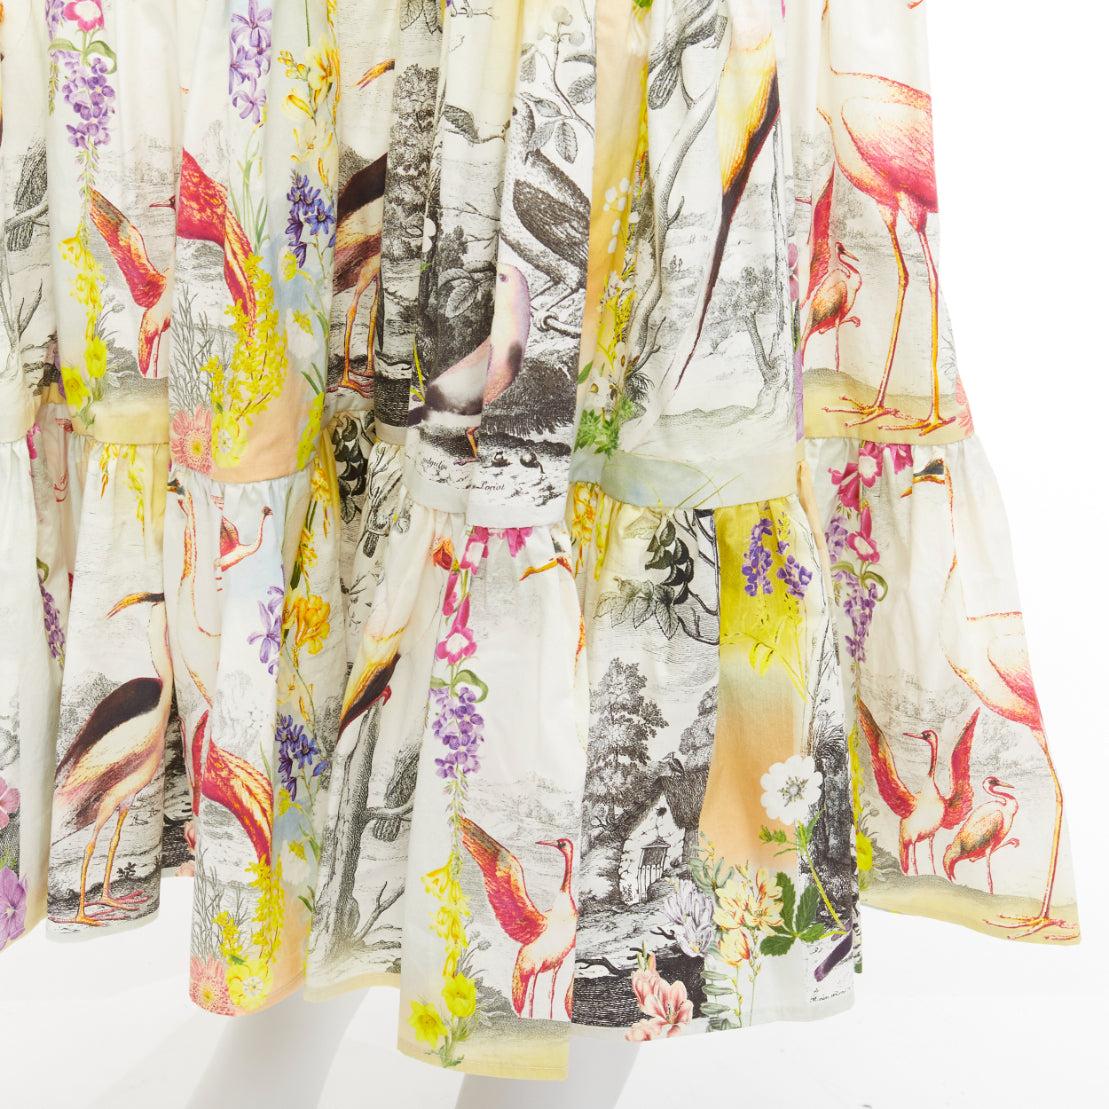 ETRO yellow multicolor flamingo garden print cotton midi skirt IT38 XS
Reference: AAWC/A00838
Brand: Etro
Material: Cotton
Color: Multicolour
Pattern: Photographic Print
Closure: Elasticated
Extra Details: You'll breeze through this summer, thinking